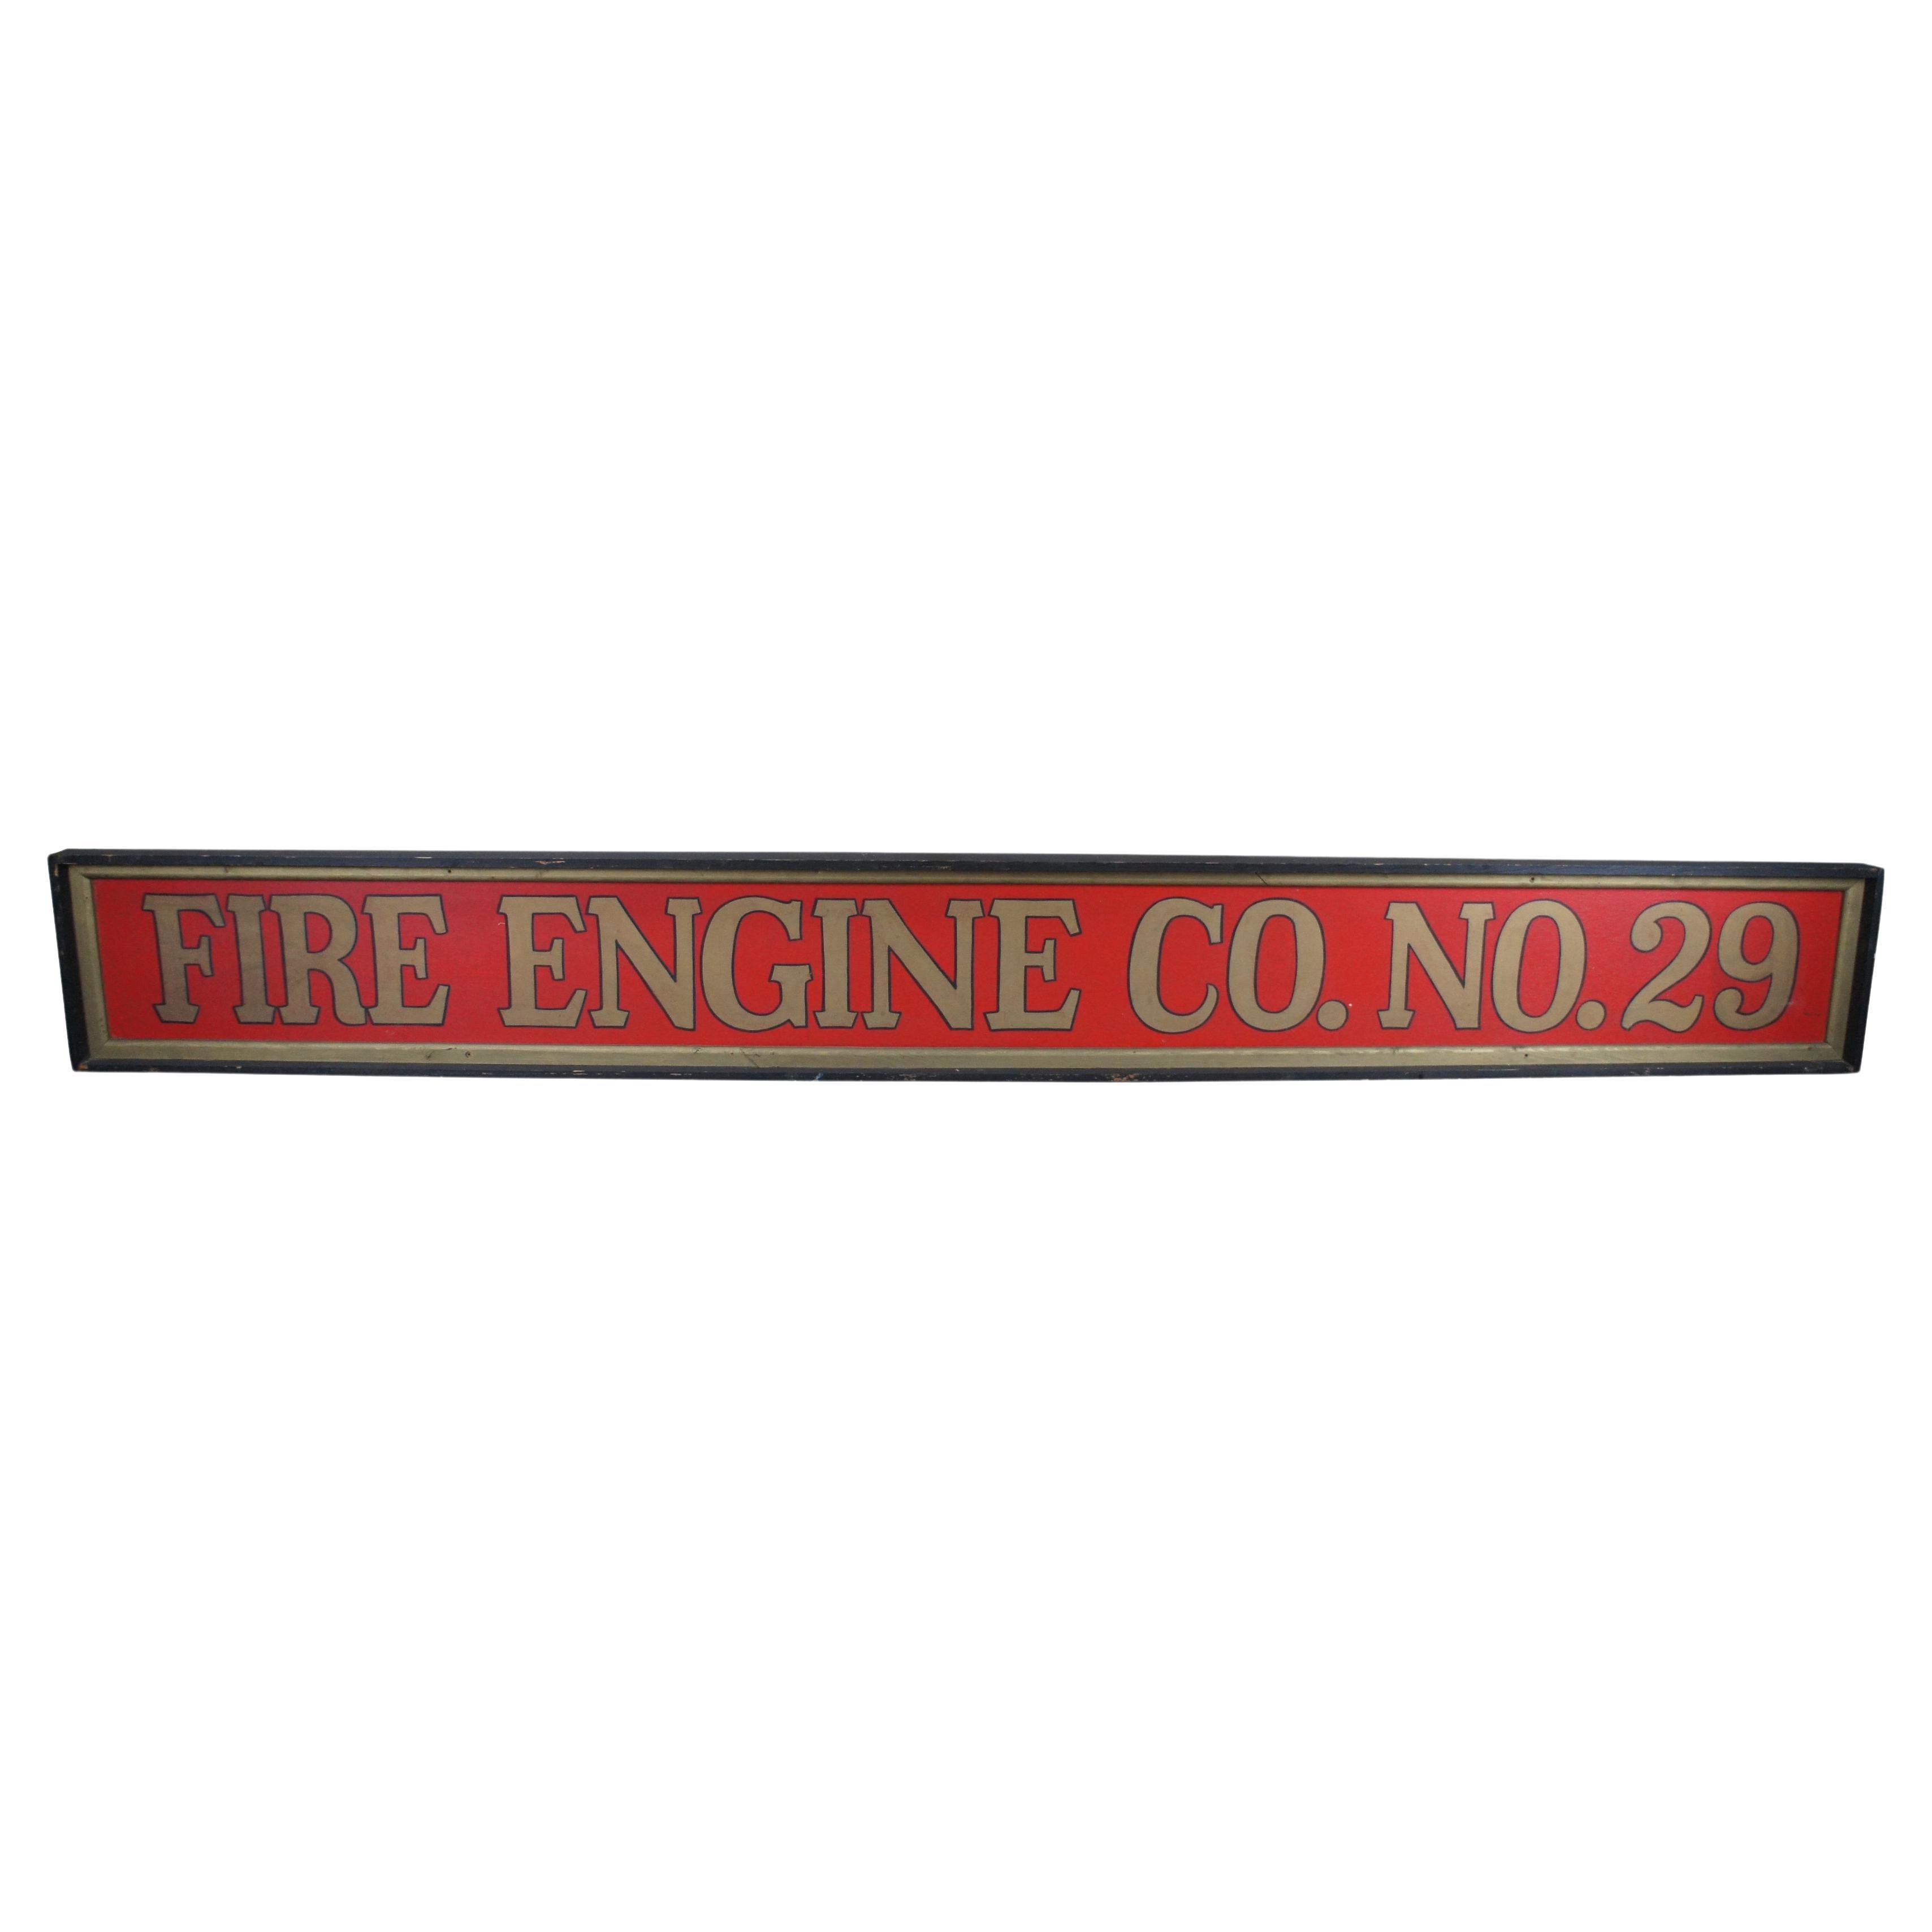 Monumental Vintage Fire Engline No. 29 Firefighter Advertising Sign 146"